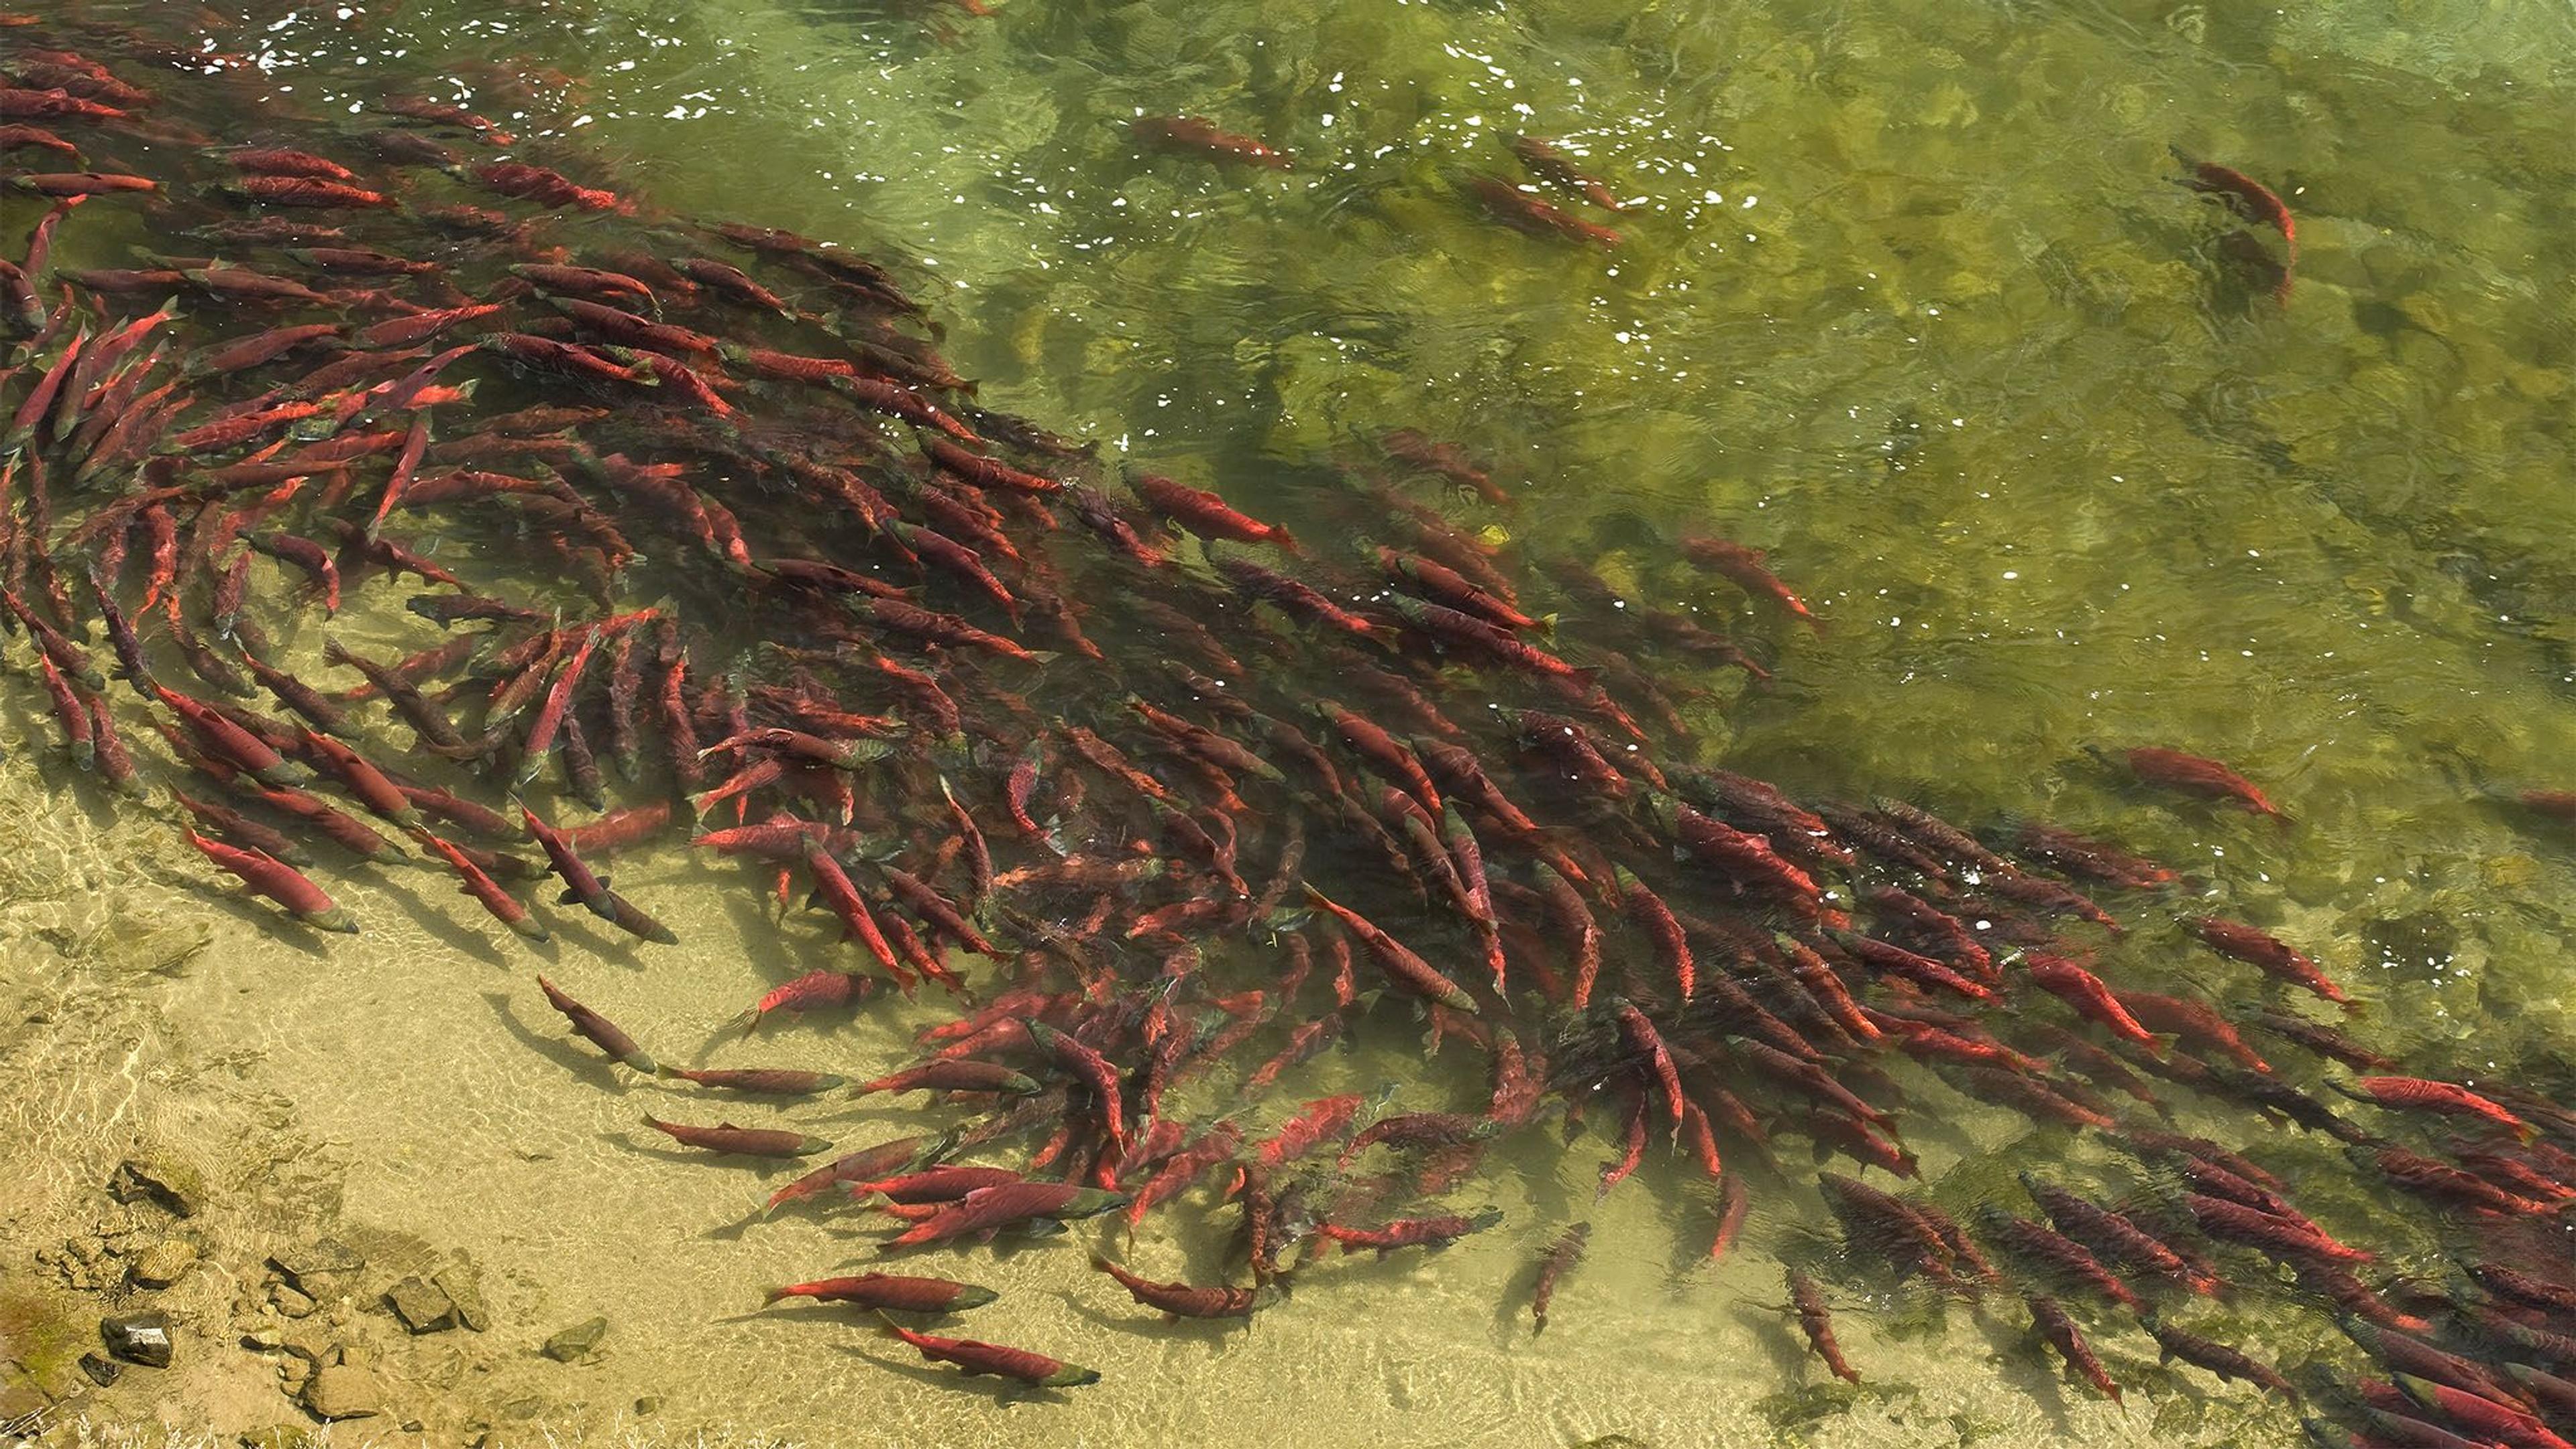 A school of red fish in clear, shallow water.